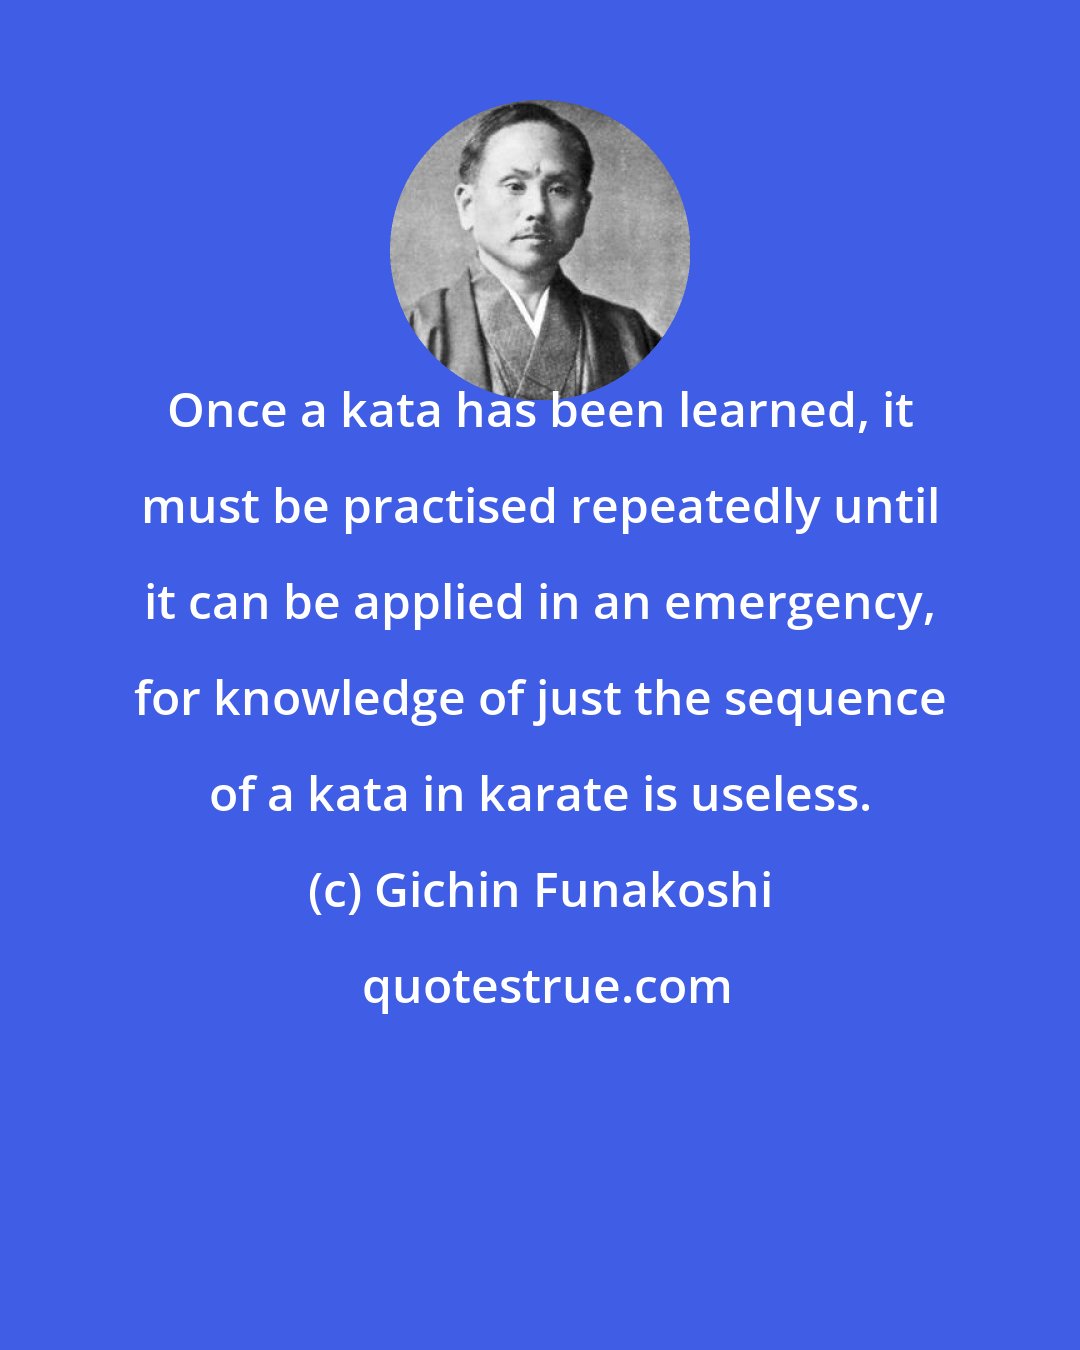 Gichin Funakoshi: Once a kata has been learned, it must be practised repeatedly until it can be applied in an emergency, for knowledge of just the sequence of a kata in karate is useless.